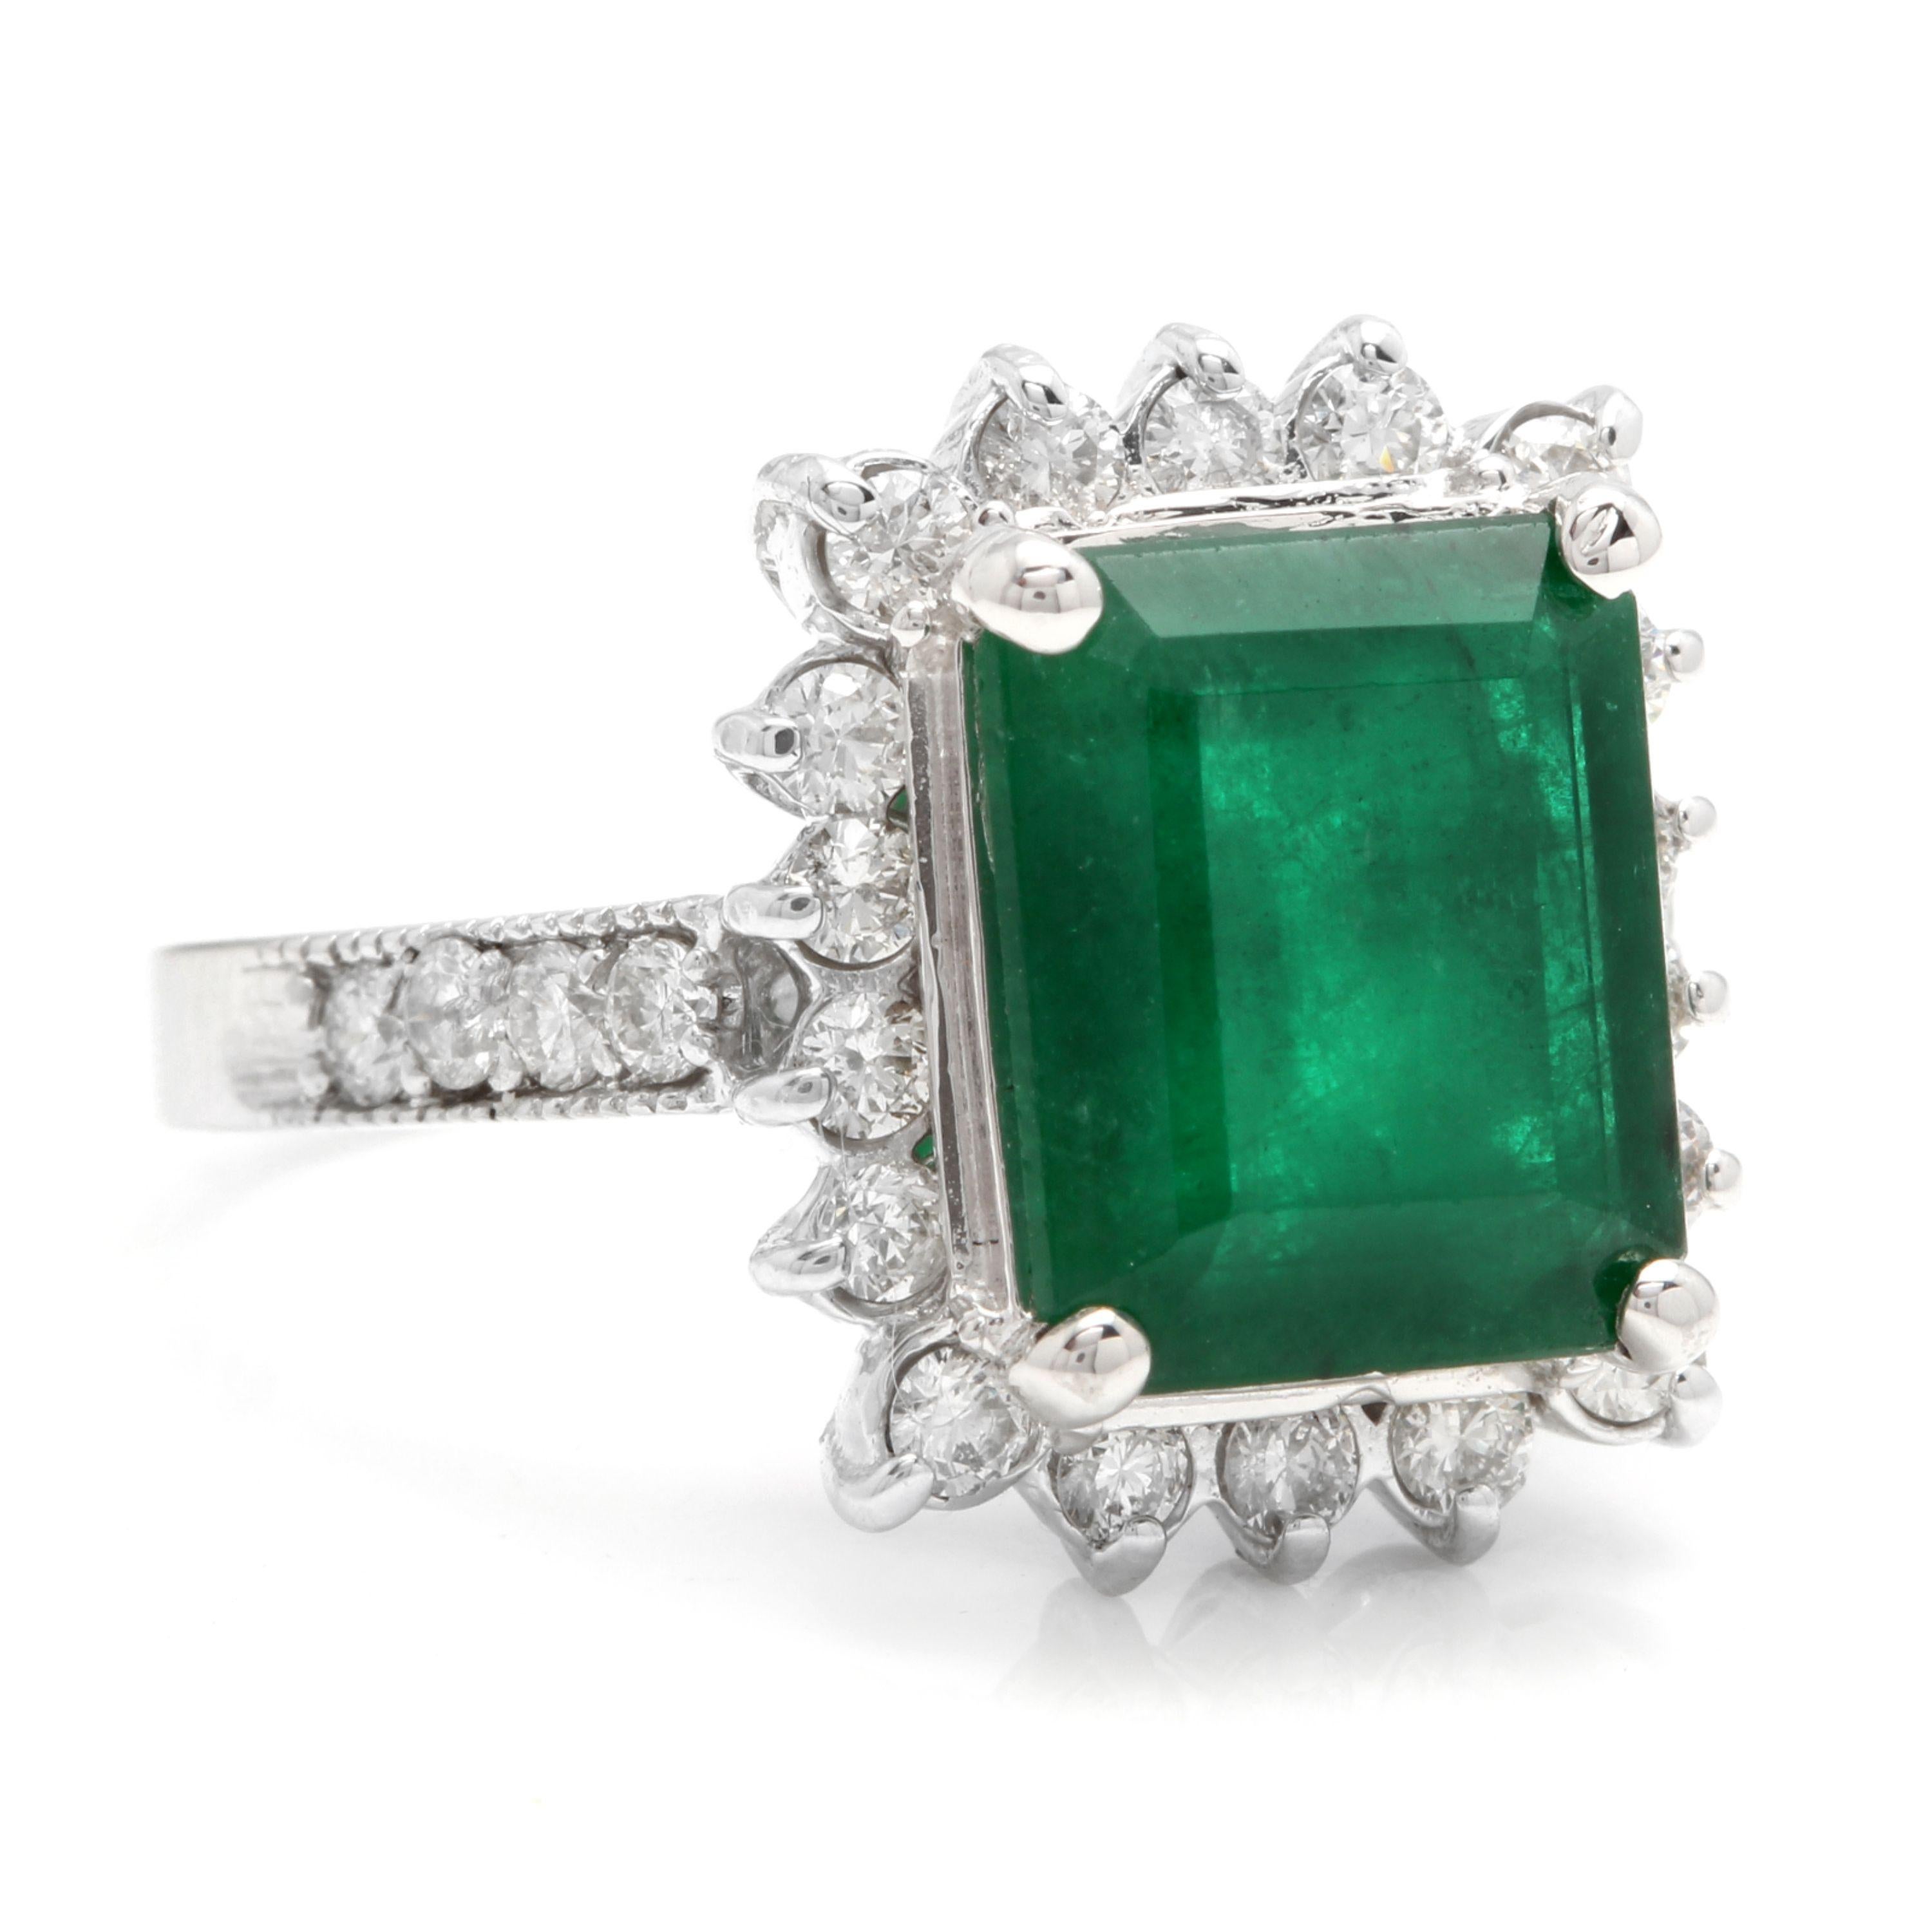 5.40 Carats Natural Emerald and Diamond 14K Solid White Gold Ring

Total Natural Green Emerald Weight is: Approx. 4.50 Carats

Emerald Measures: Approx. 11 x 8mm

Natural Round Diamonds Weight: Approx. 0.90 Carats (color G-H / Clarity